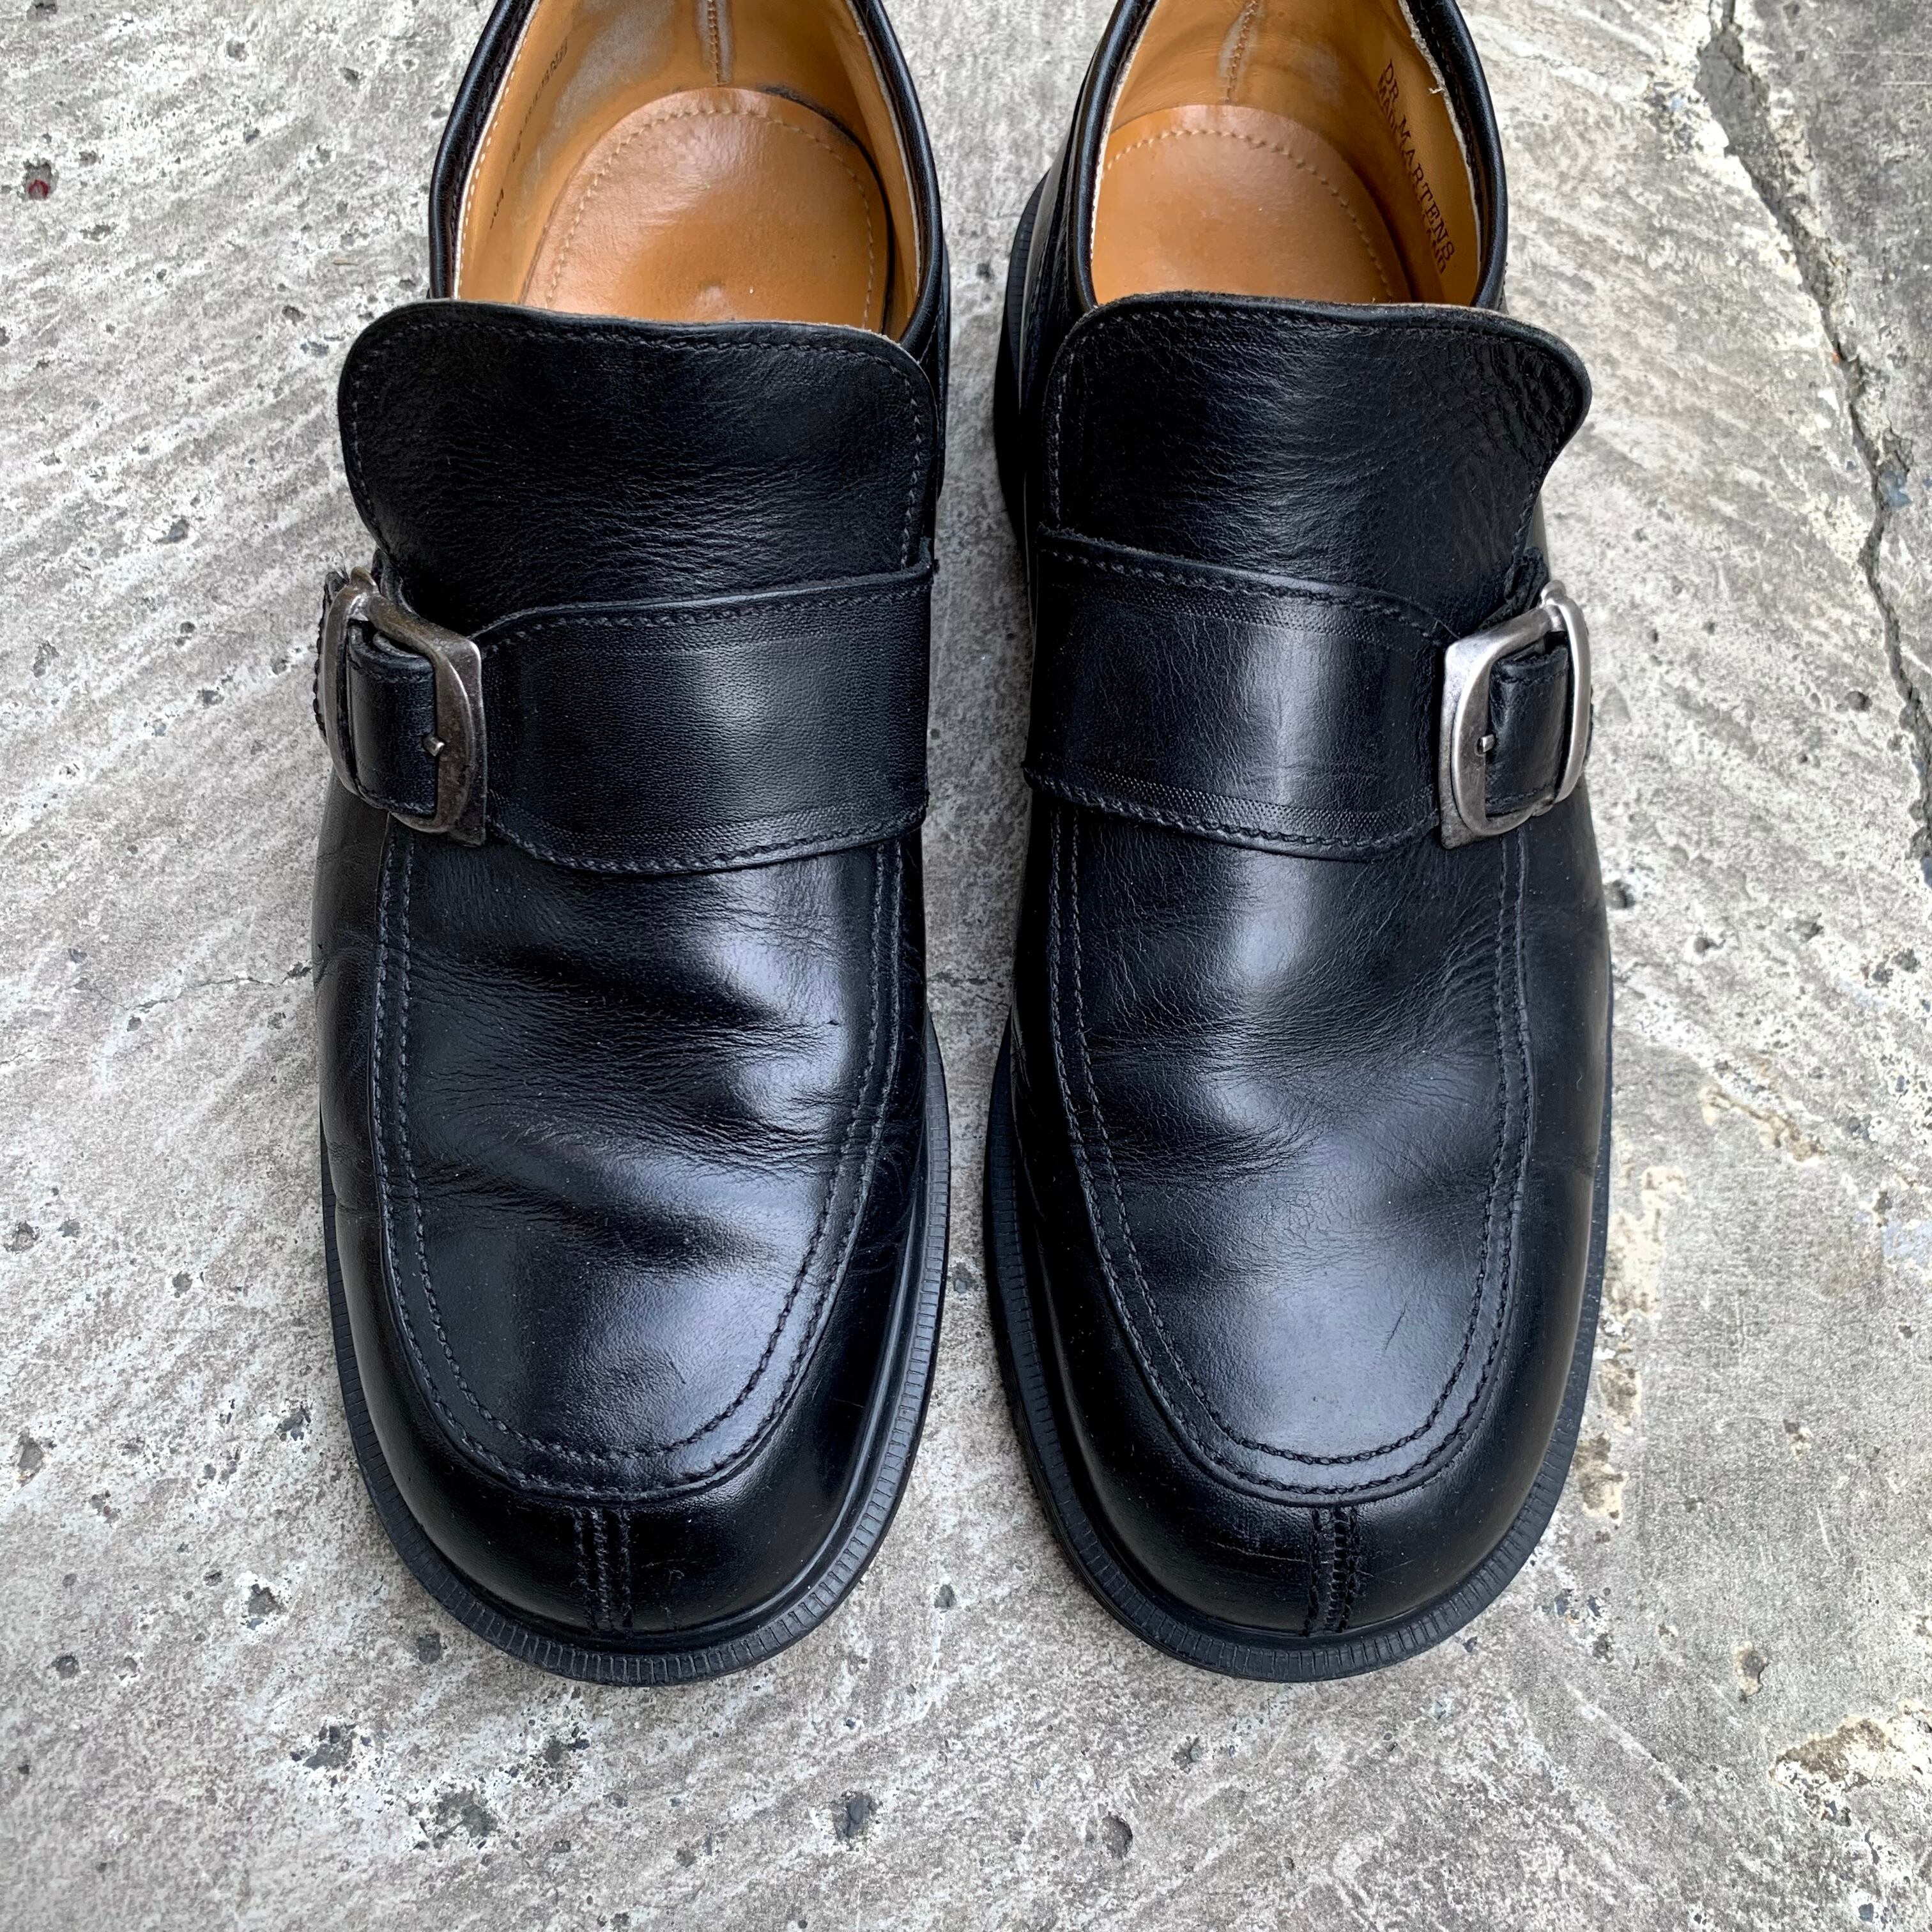 USED】90's〜 vintage "DR.MARTENS" MONK STRAP BOOTS | HEIGHTS Online Store